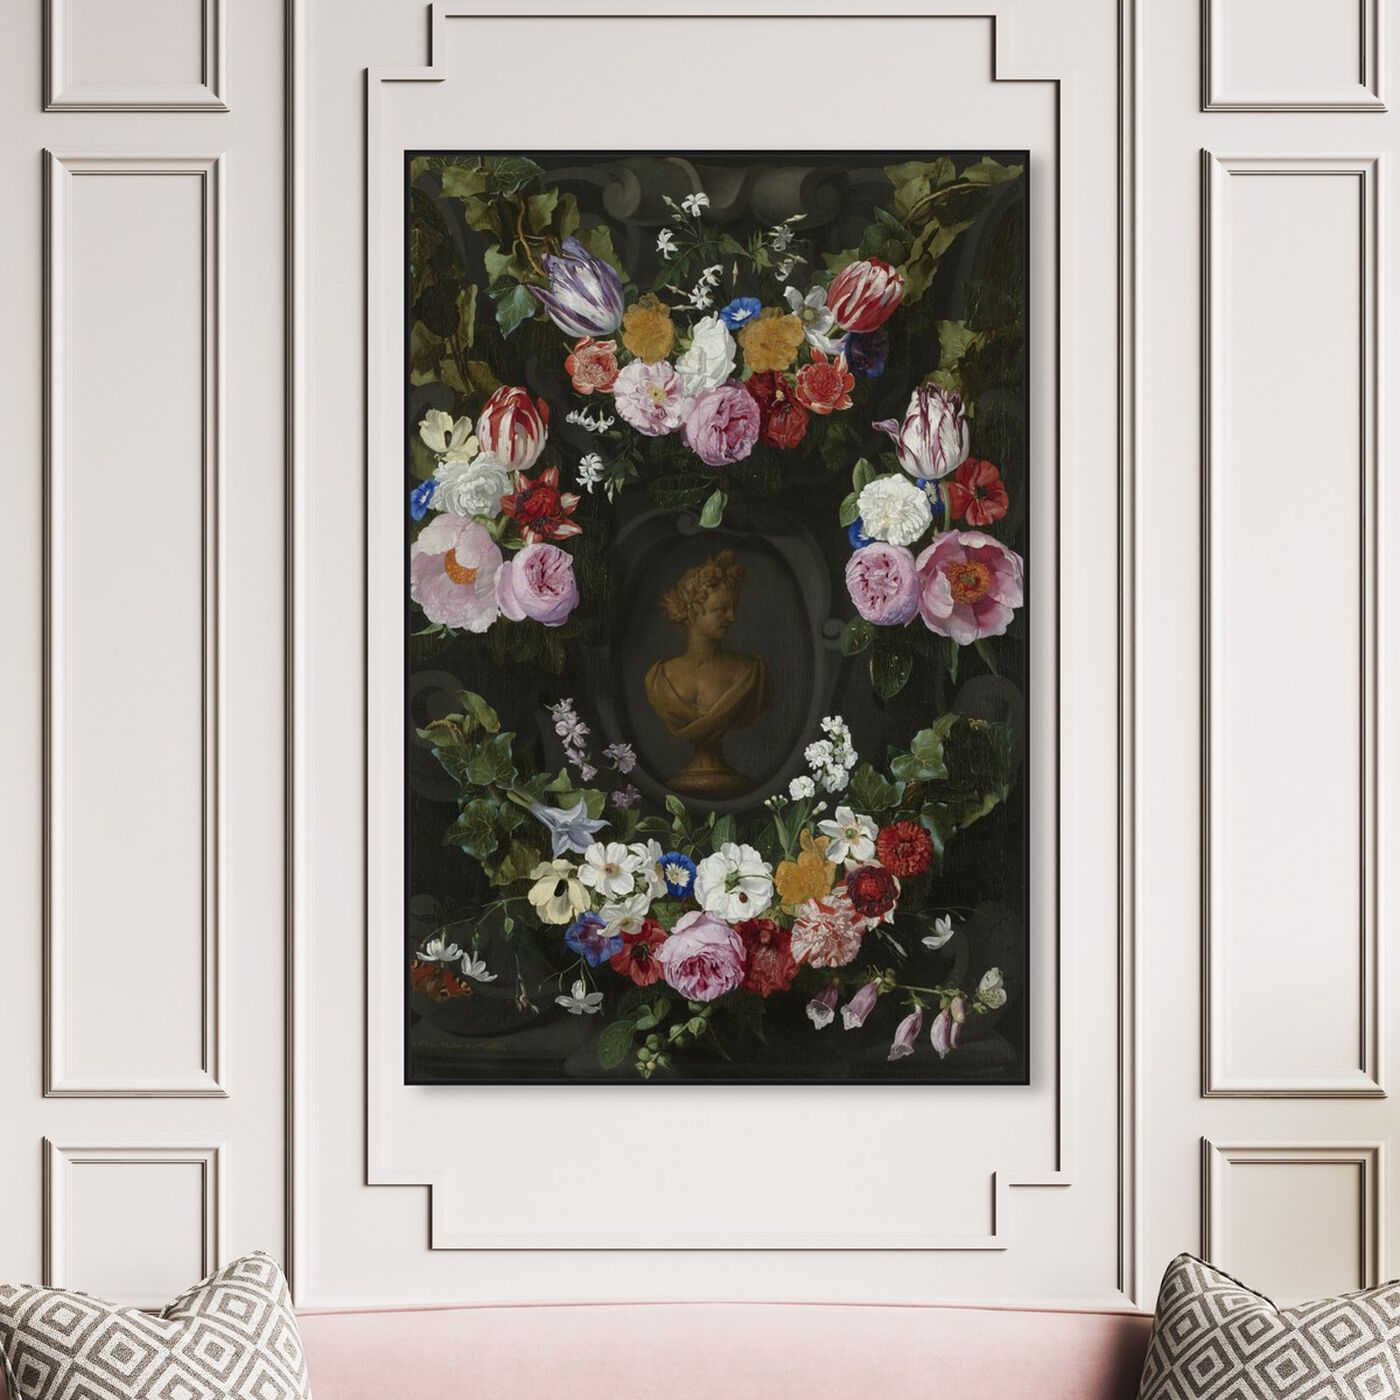 Hanging view of Flower Arrangement X - The Art Cabinet featuring floral and botanical and florals art.